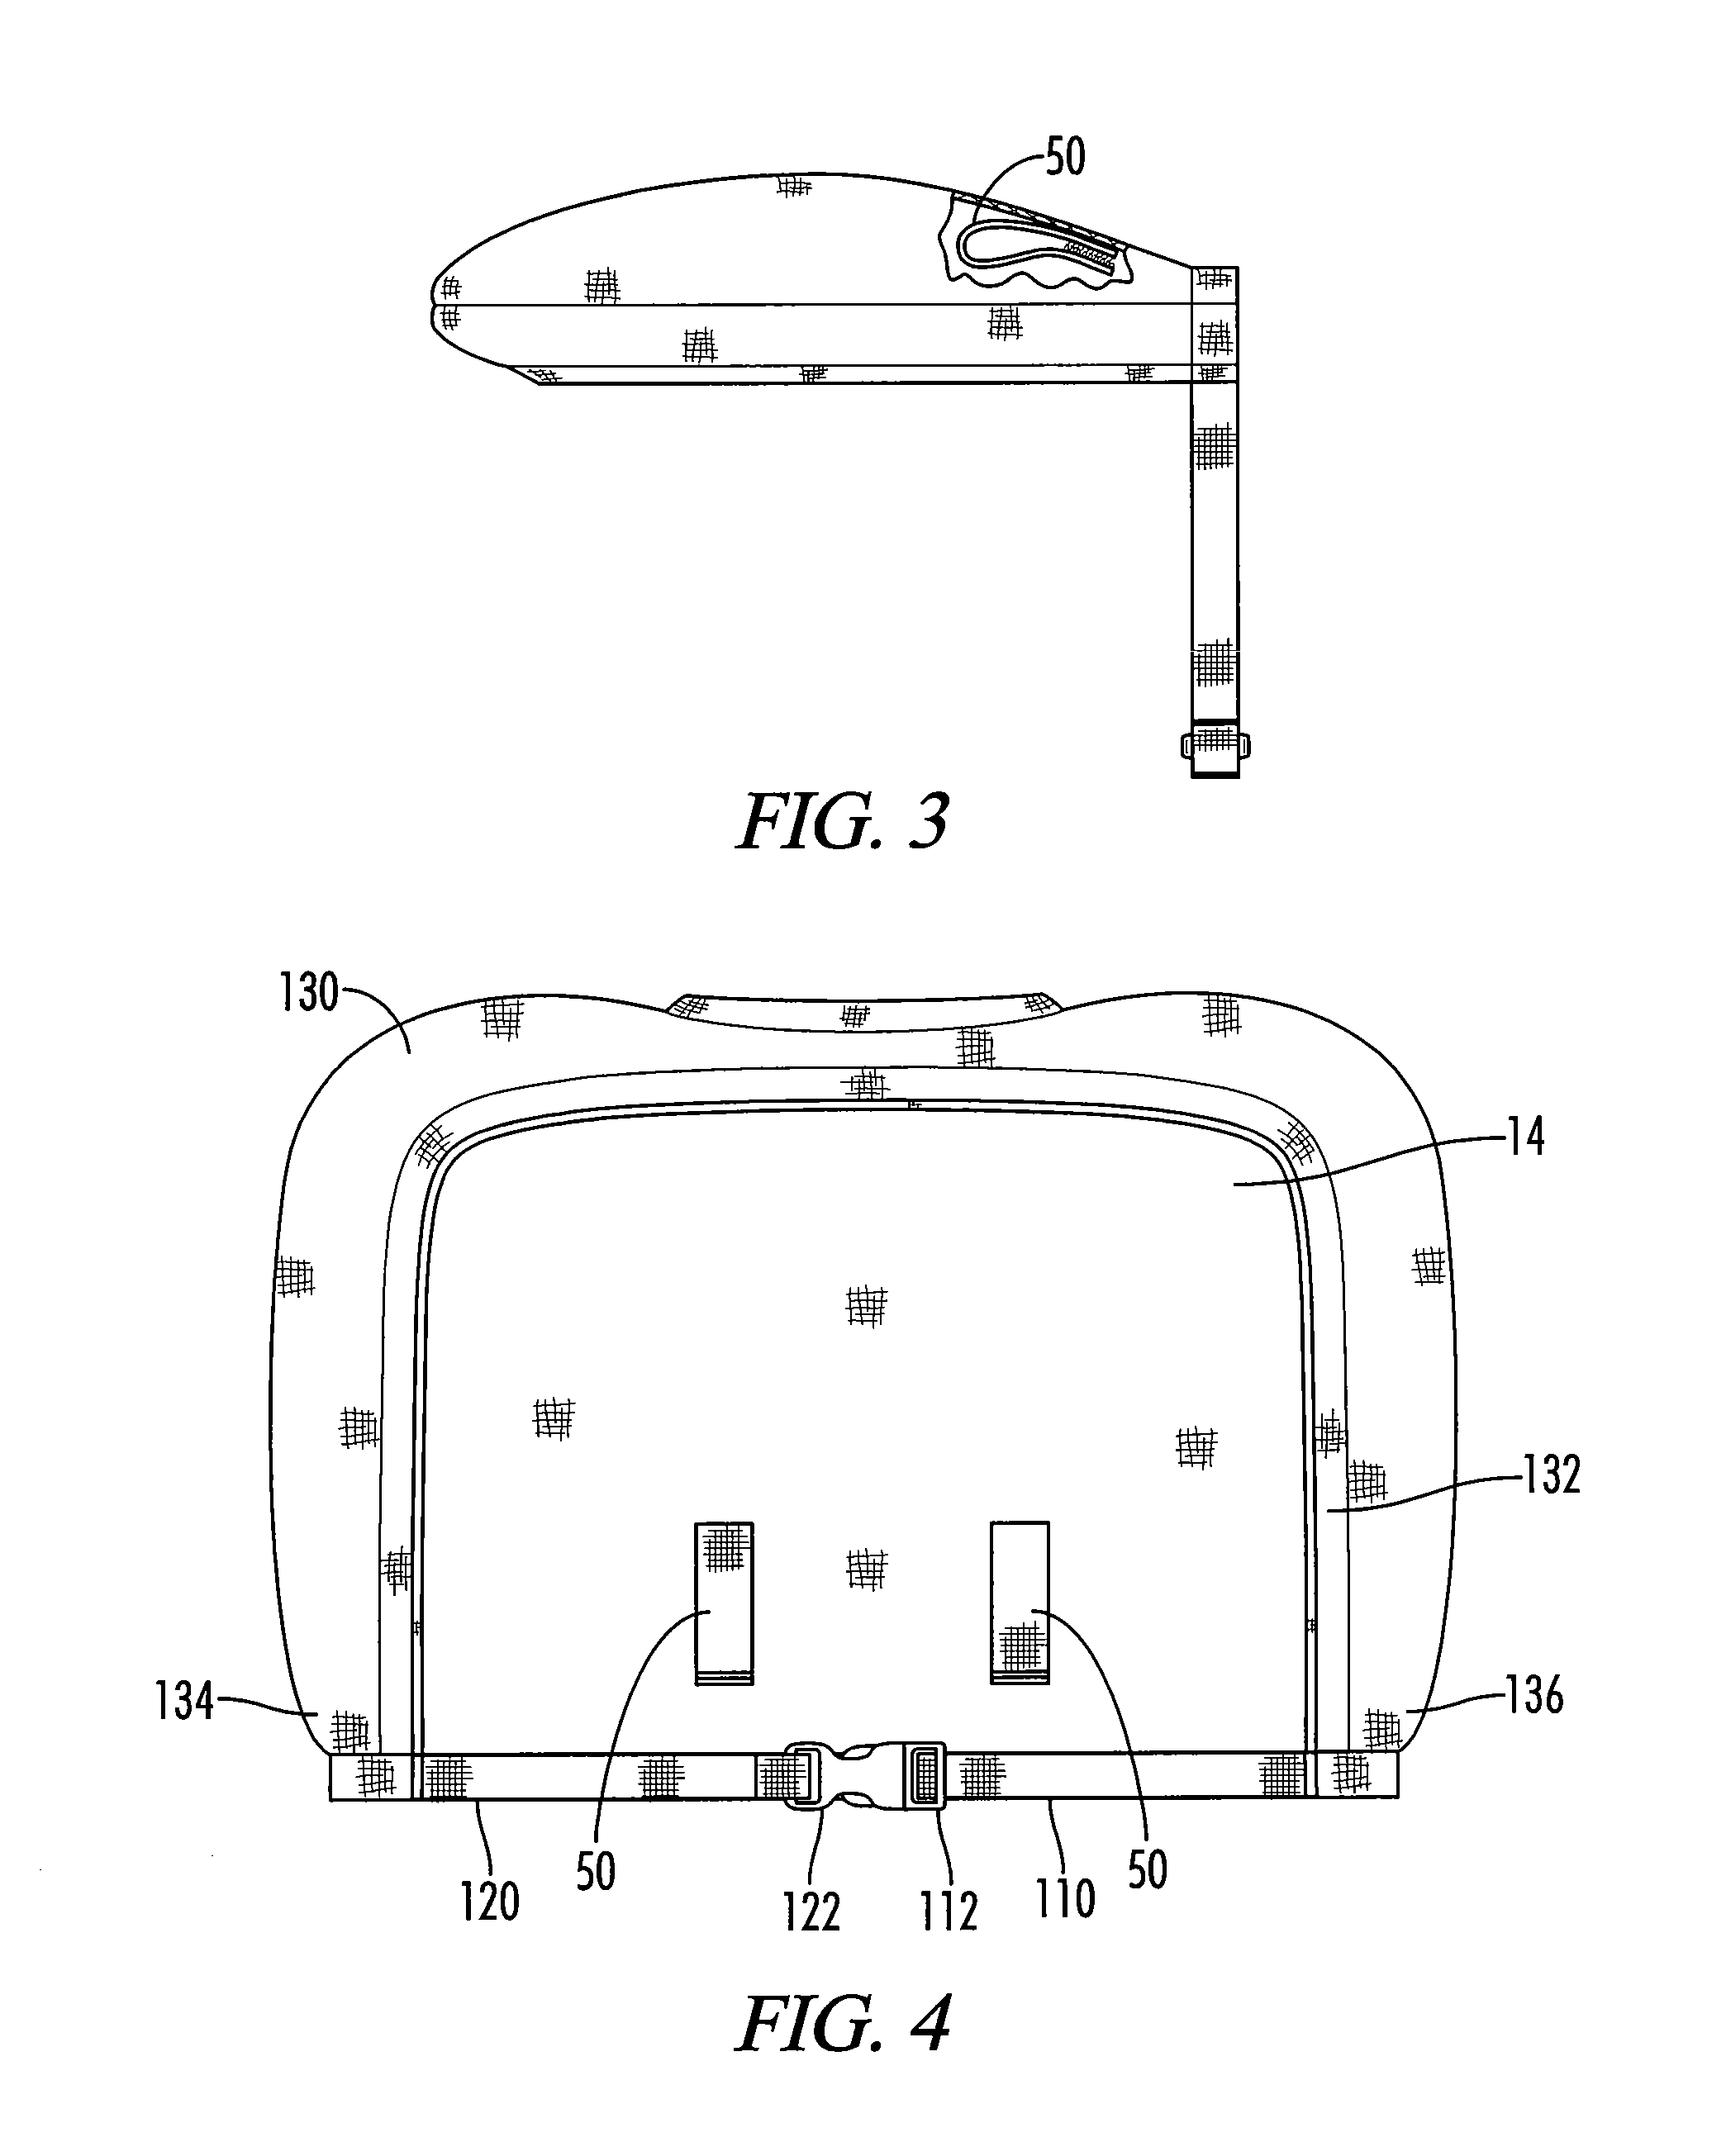 Infant covering blanket adapted for use with infant supporting apparatuses